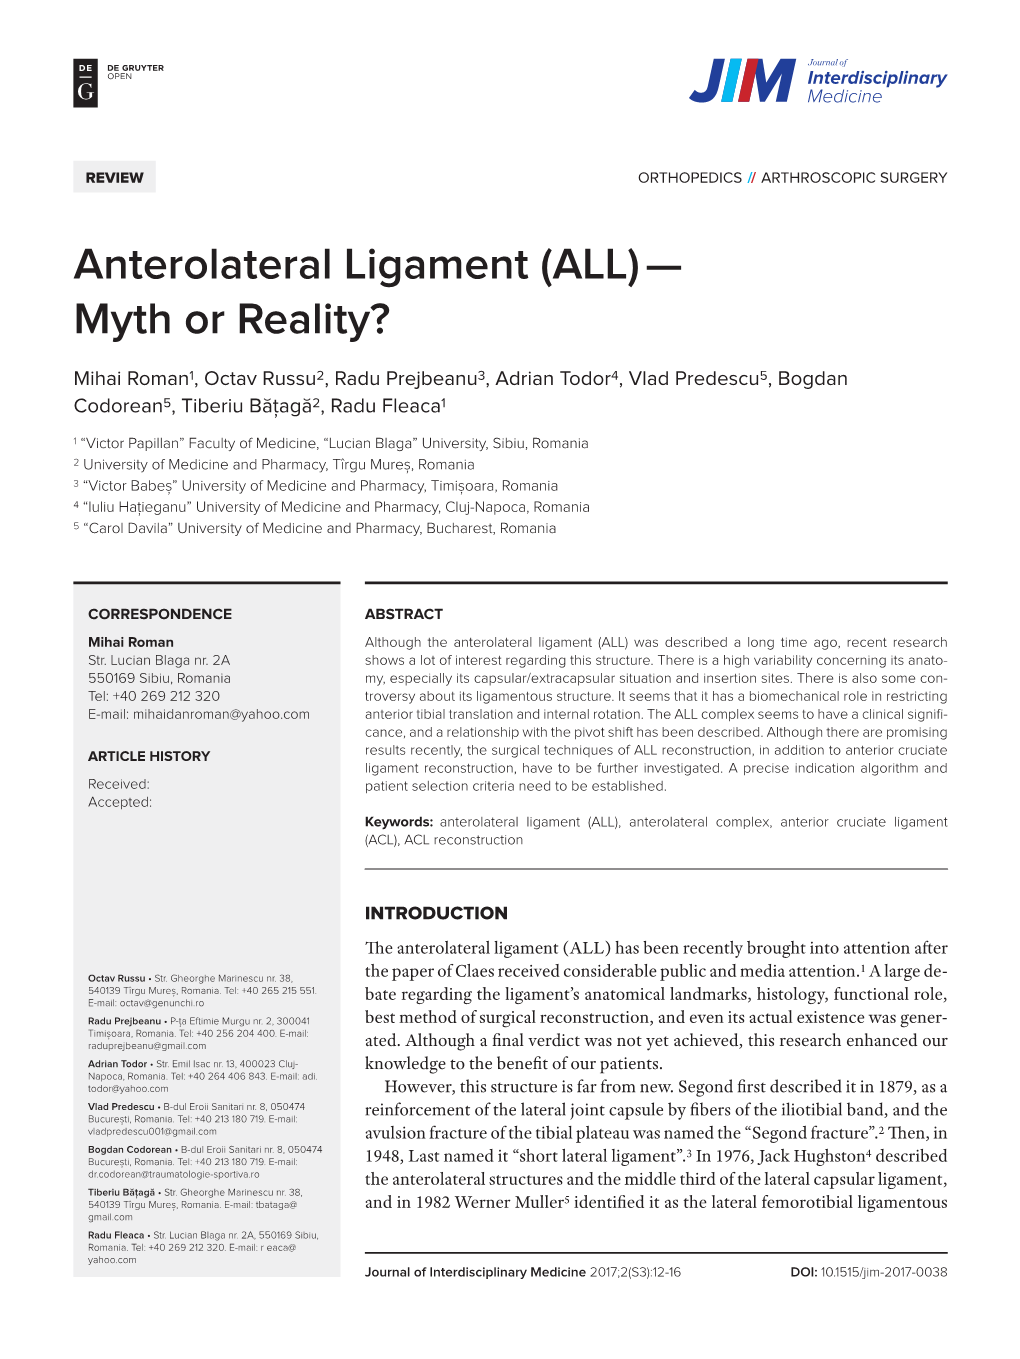 Anterolateral Ligament (ALL) — Myth Or Reality?